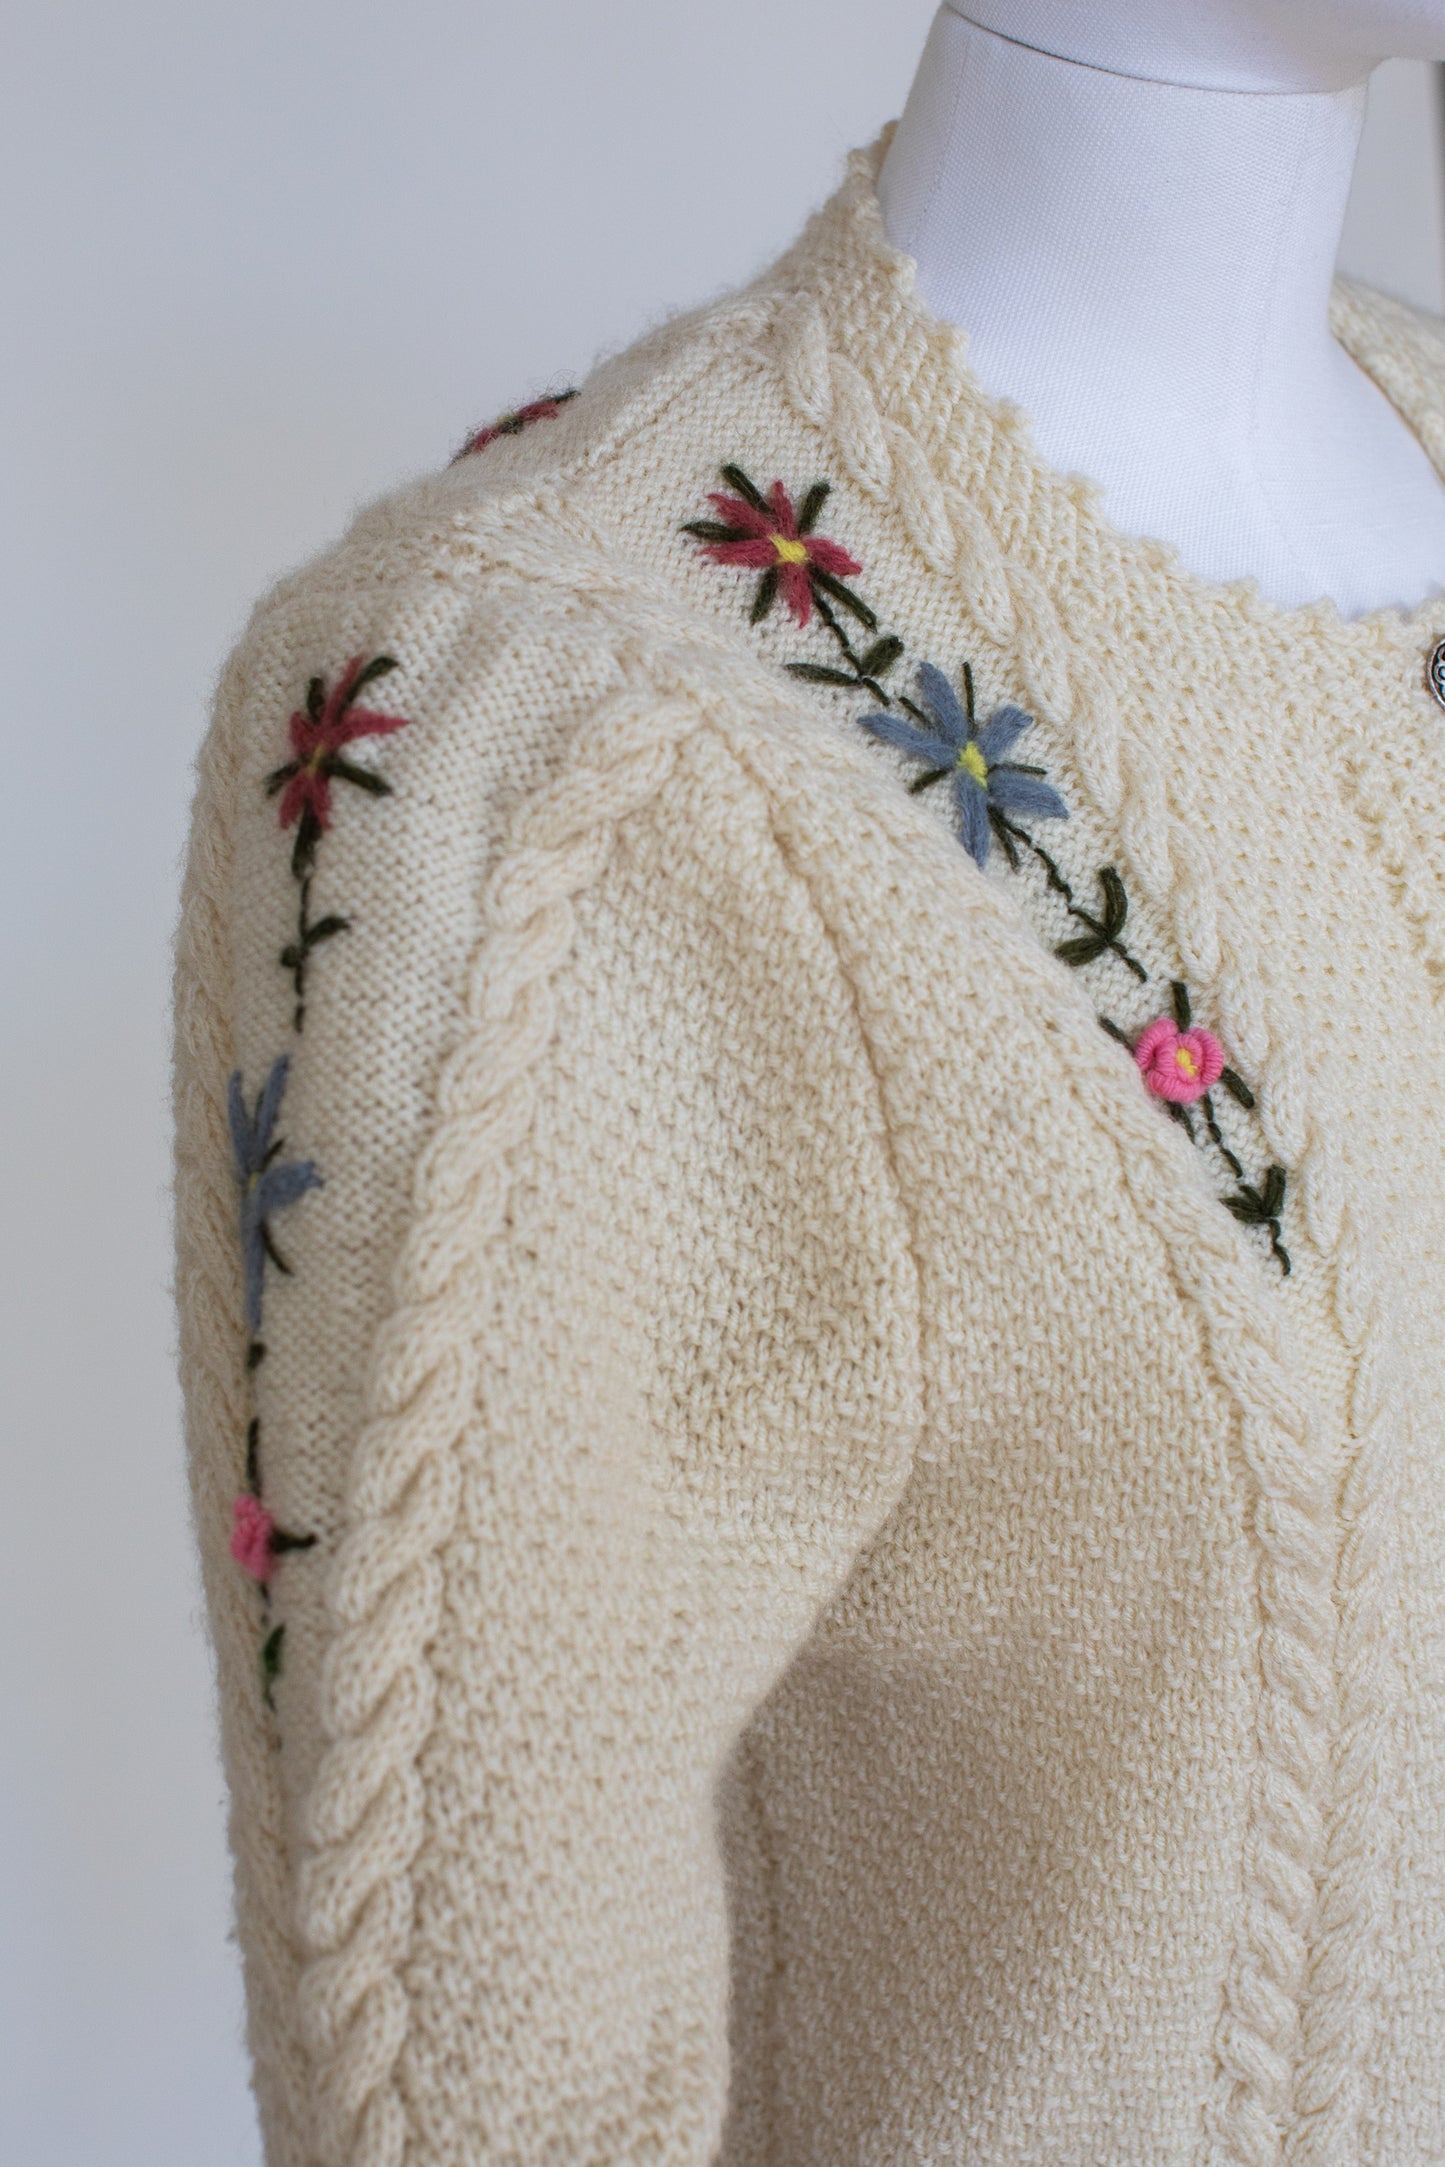 Vintage Beige Hand Knitted Austrian Cardigan with Floral Embroidery Size XS-S